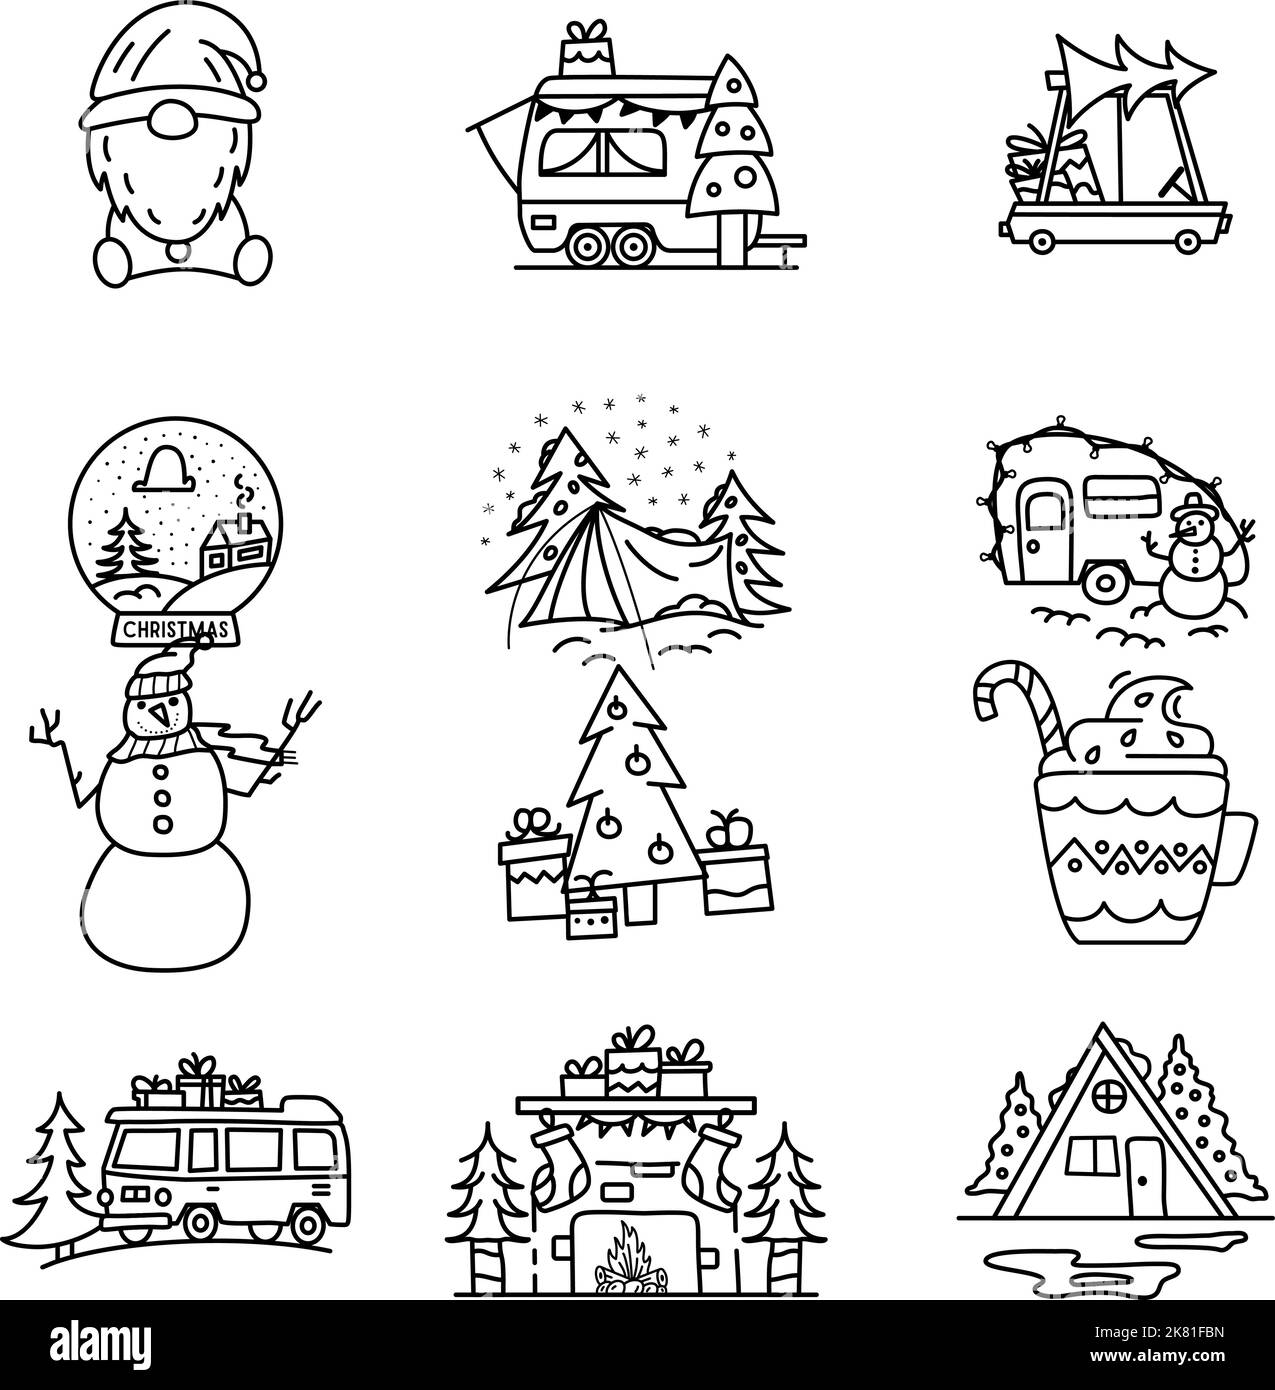 Christmas camping icons and elements in line art style. Silhouette travel symbols icluding snowman, rv trailer, christmas trees. Stock vector graphics Stock Vector